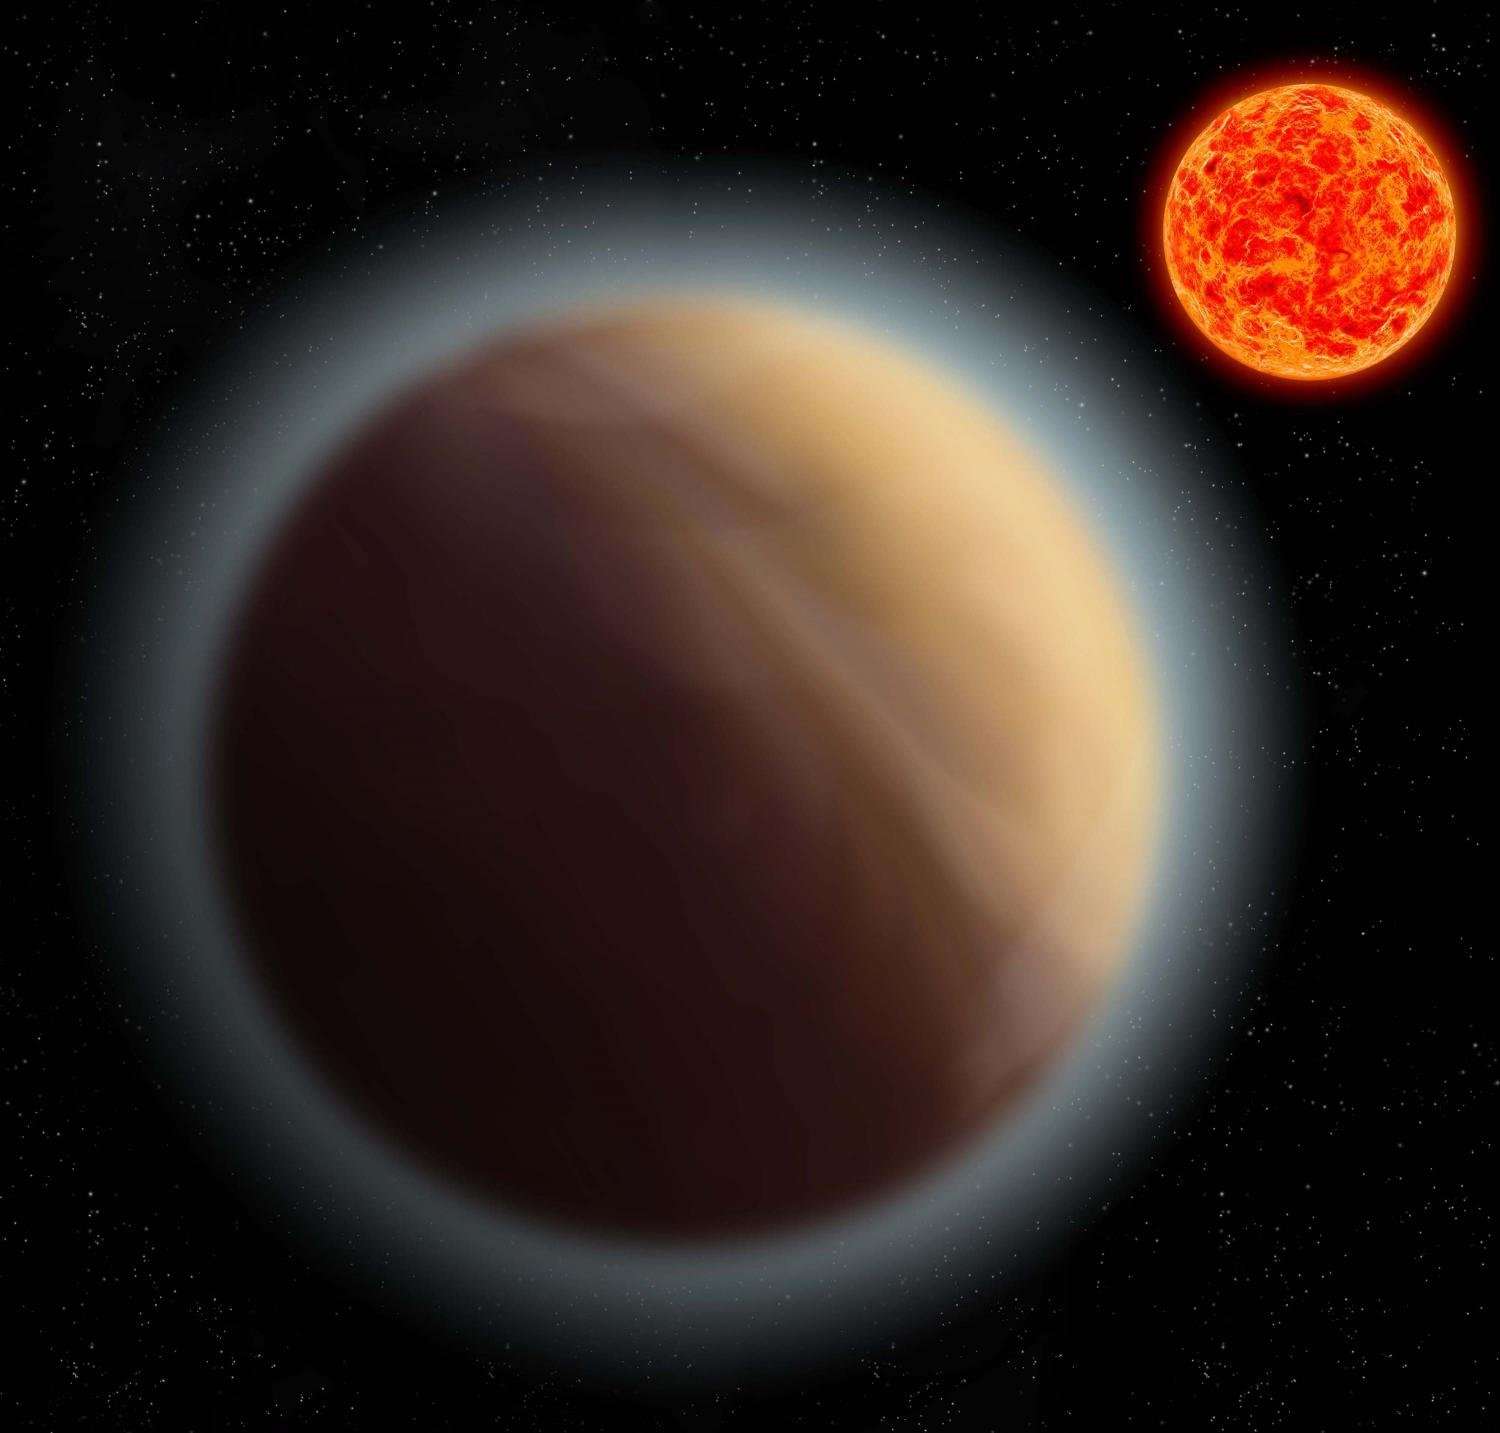 image for Atmosphere around super-Earth detected